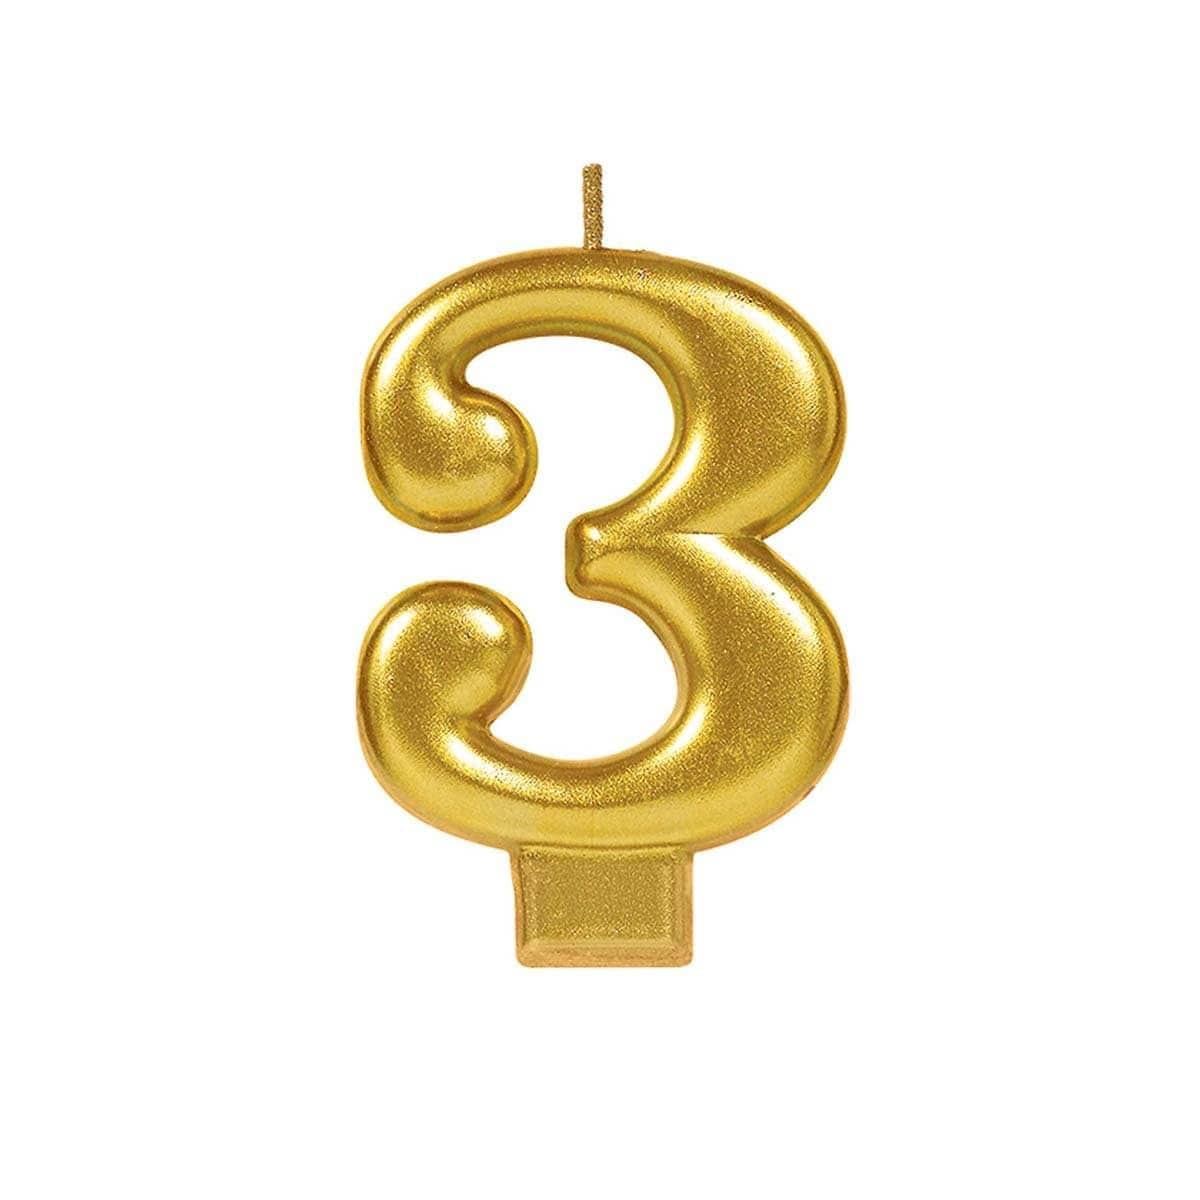 Buy Cake Supplies Metallic Numeral Candle #3 - Gold sold at Party Expert